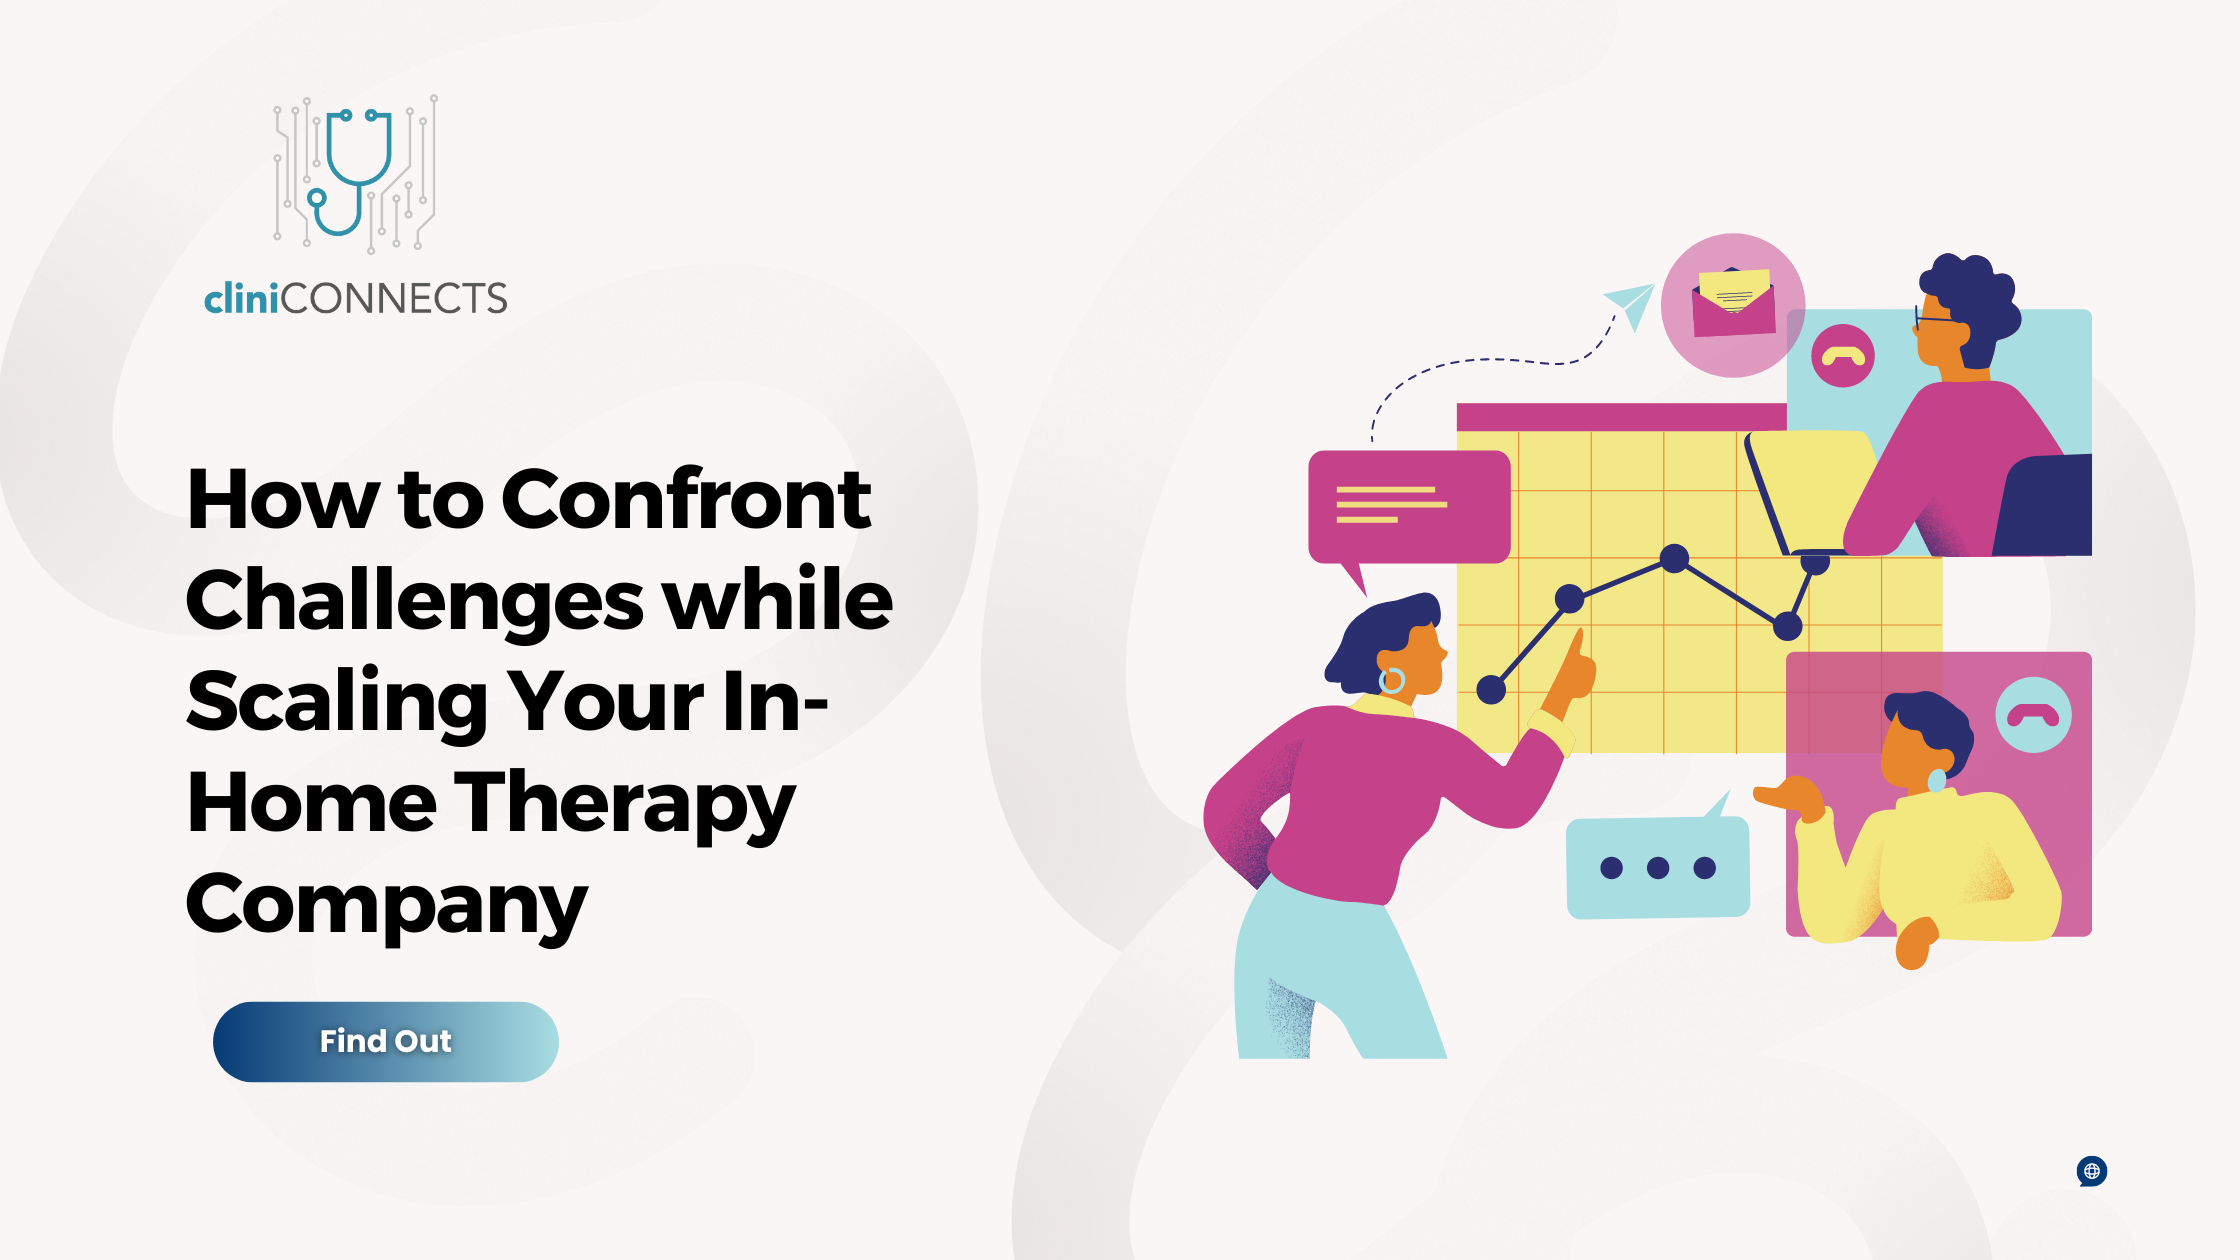 How to Confront Challenges while Scaling Your In-Home Therapy Company